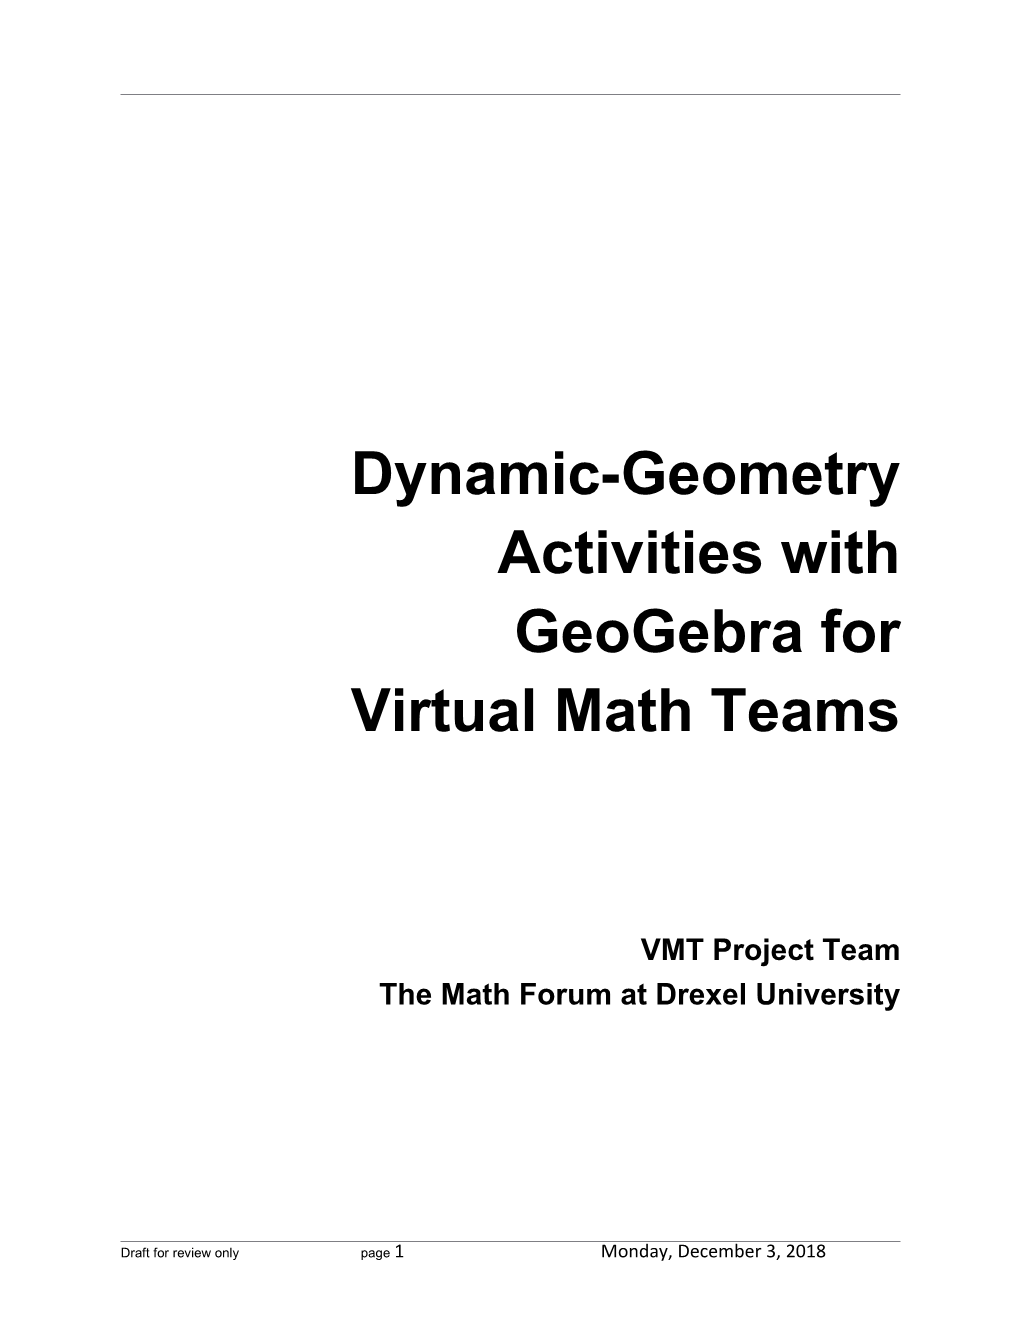 Dynamic Geometry Activities with Geogebra for VMT